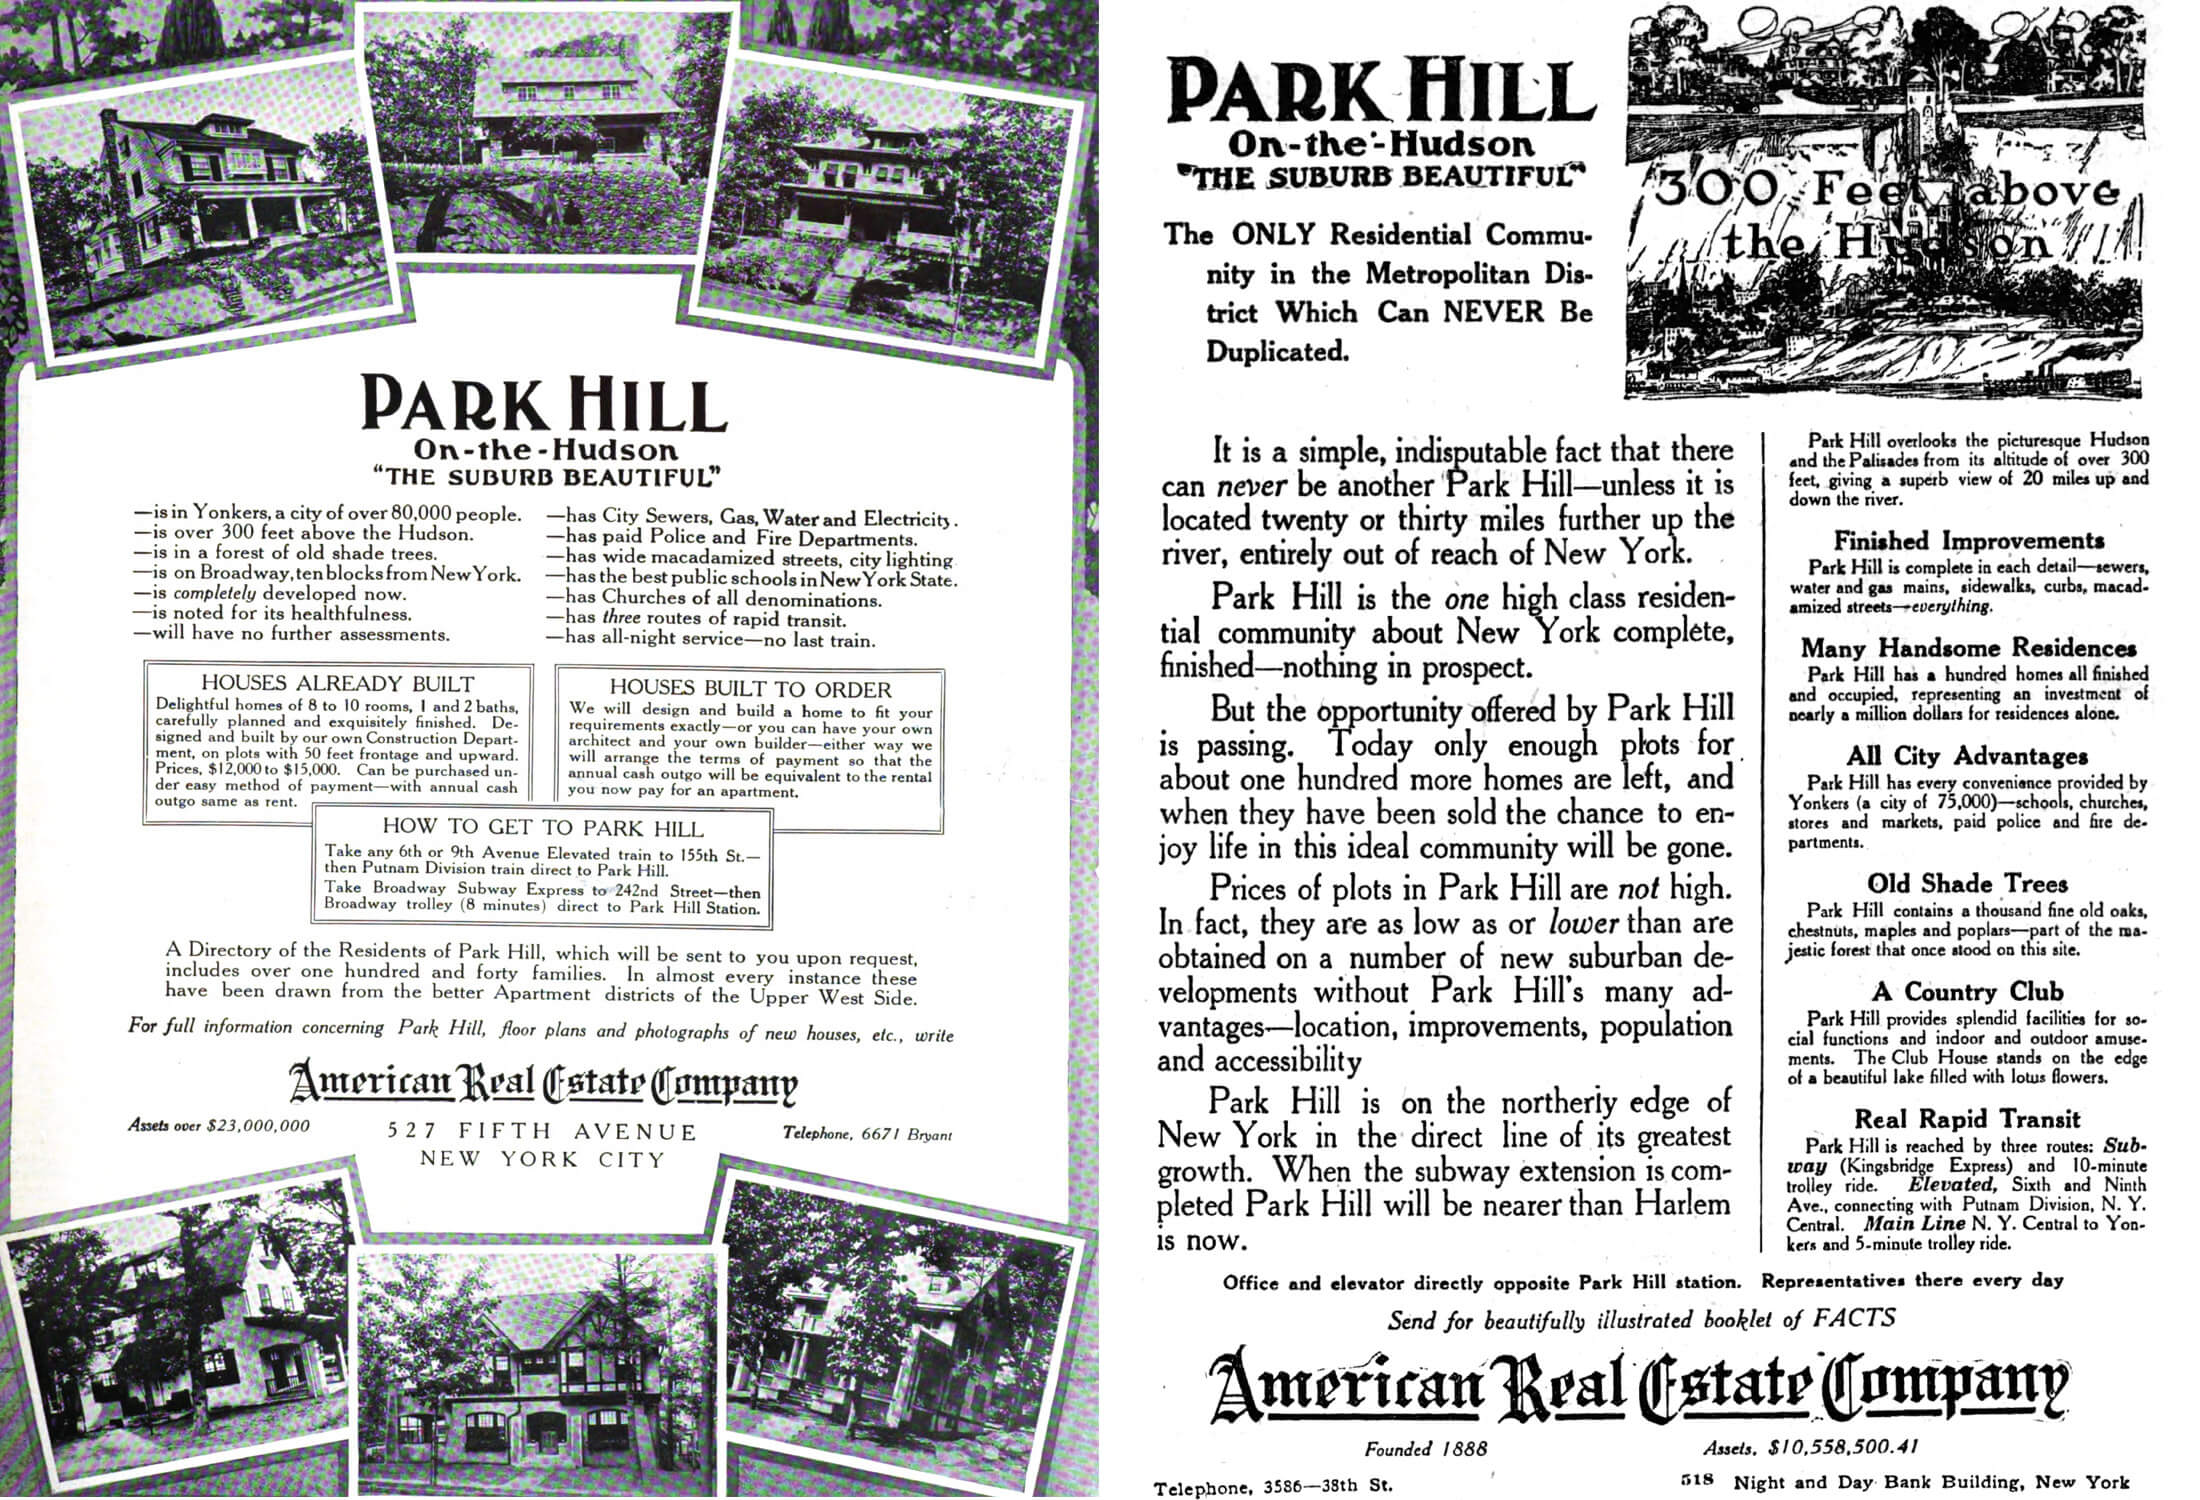 black and white ads describing the attractions of the neighborhood